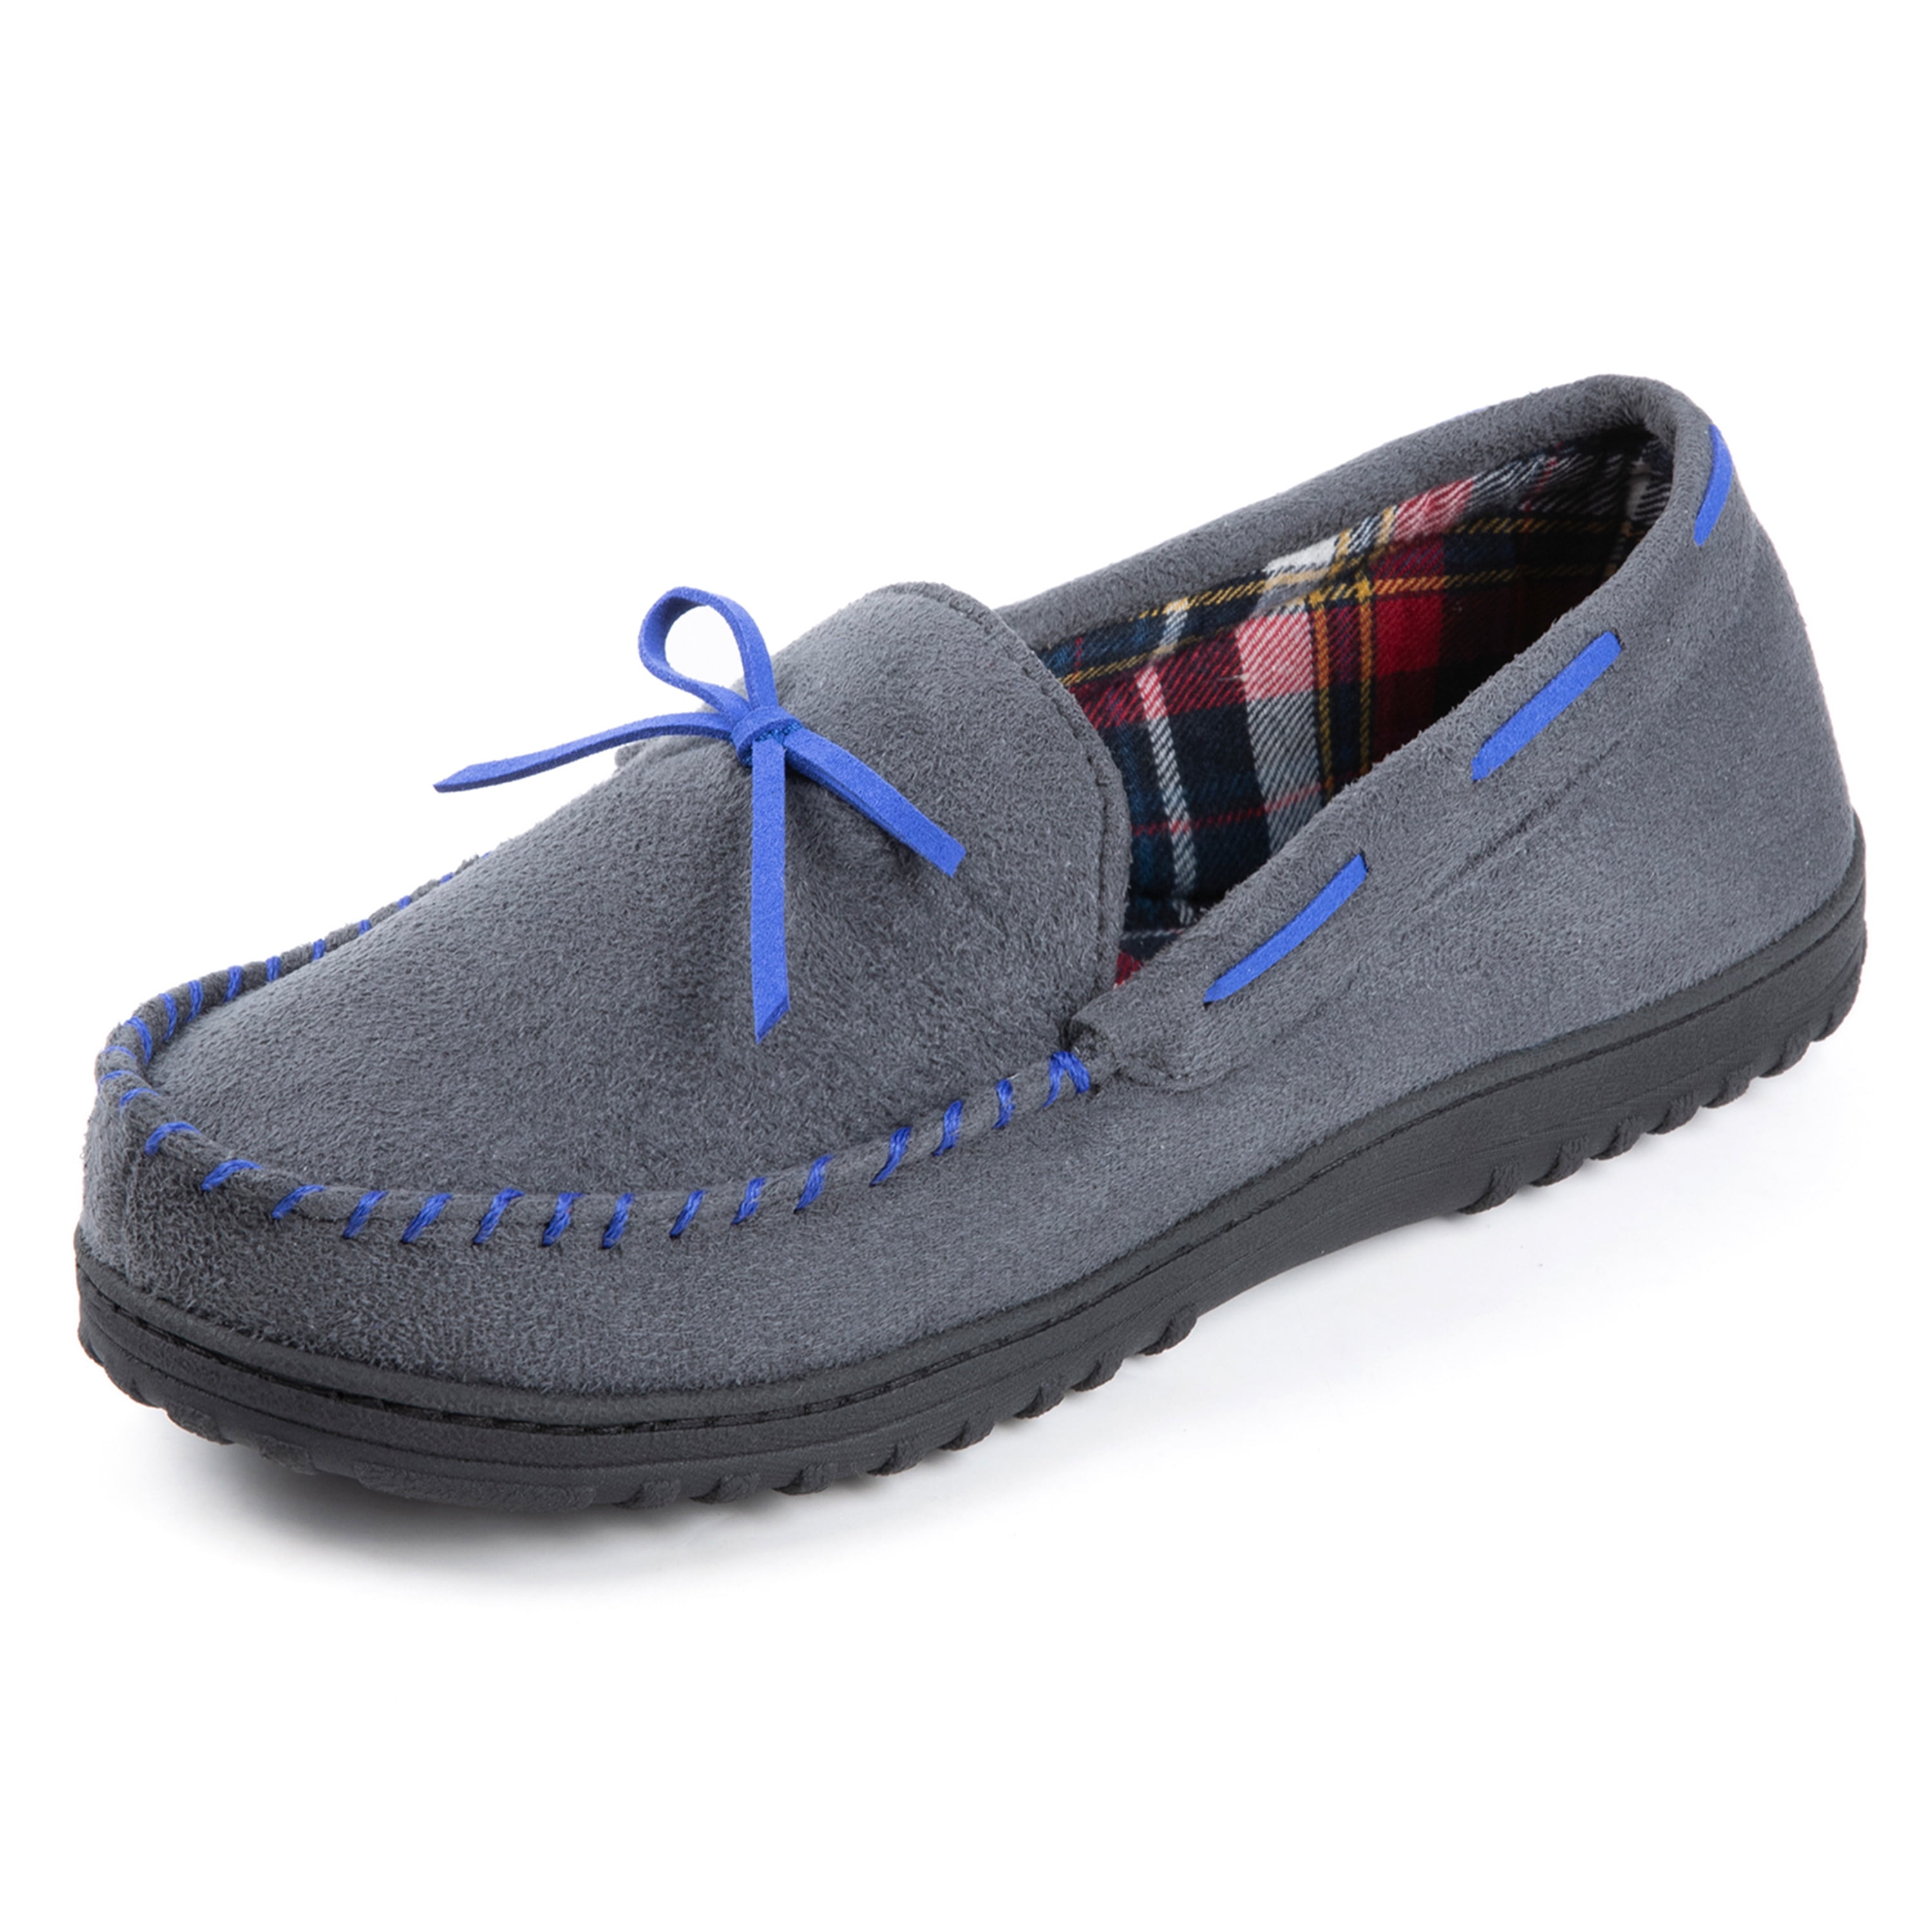 Buy > mens moccasin slippers flannel lined > in stock